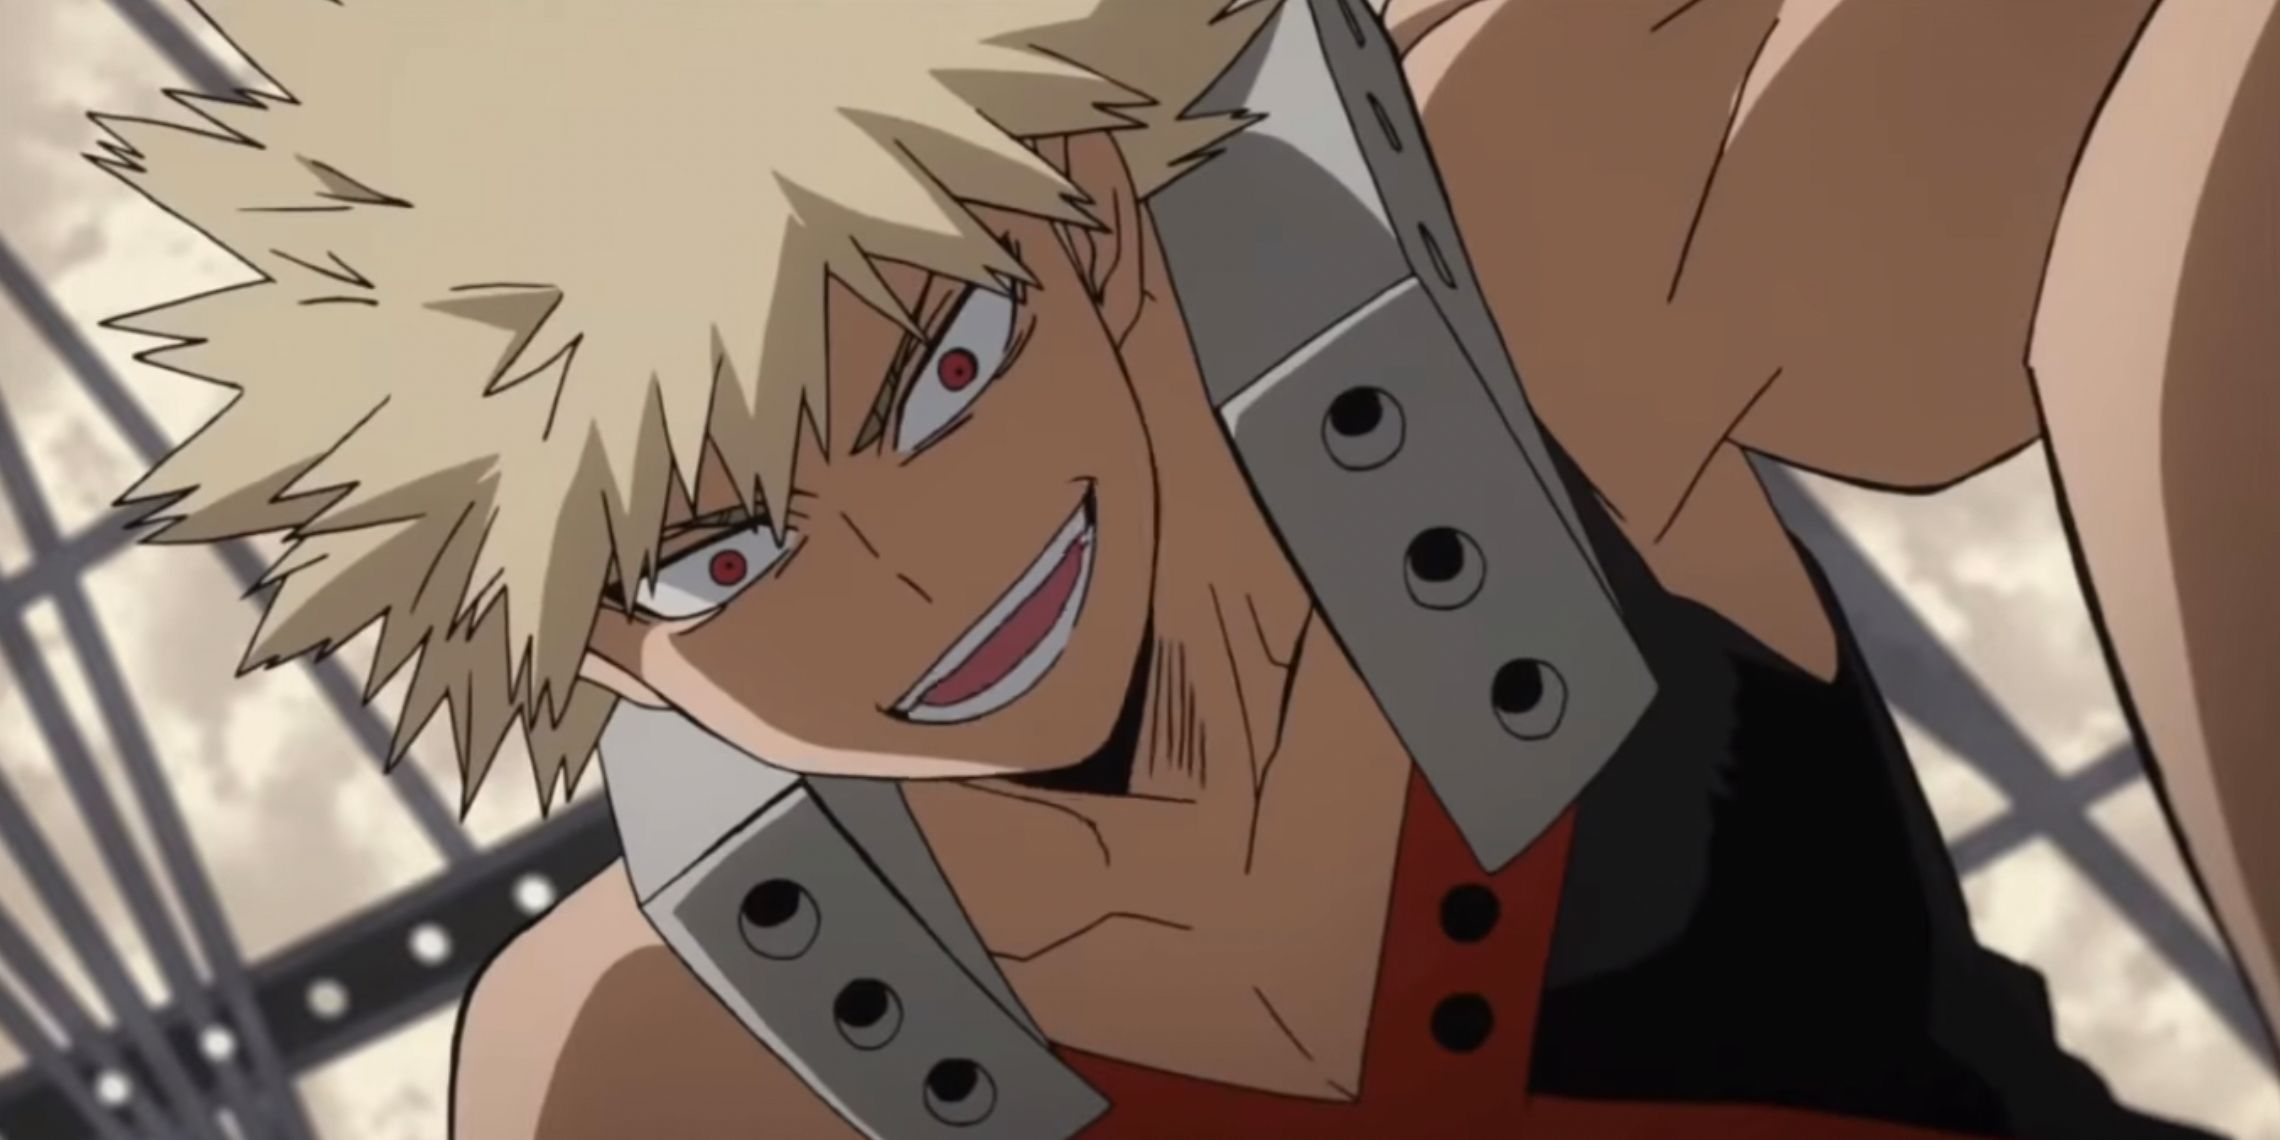 Katsuki Bokugo grins while in a fight in My Hero Academia